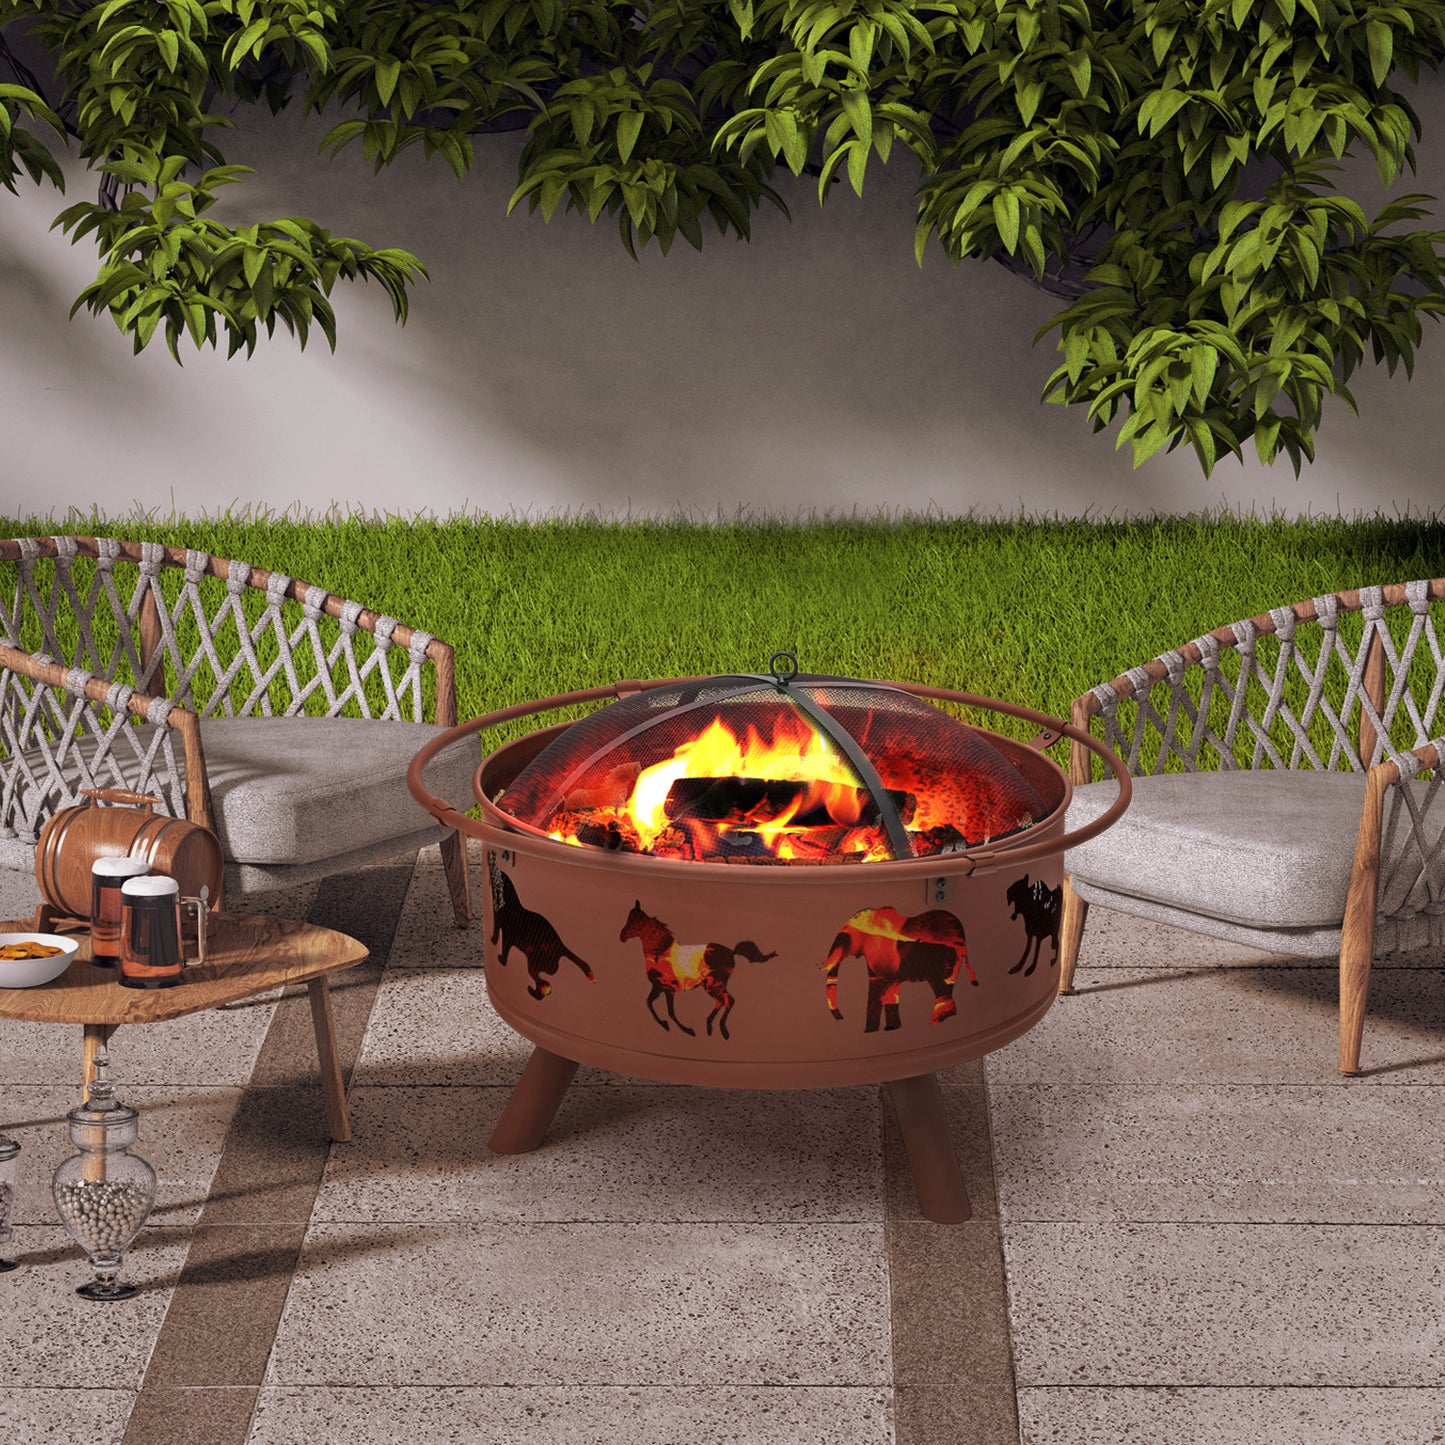 32" Horse Pattern Round Fire Pit w/Poker & Spark Screen